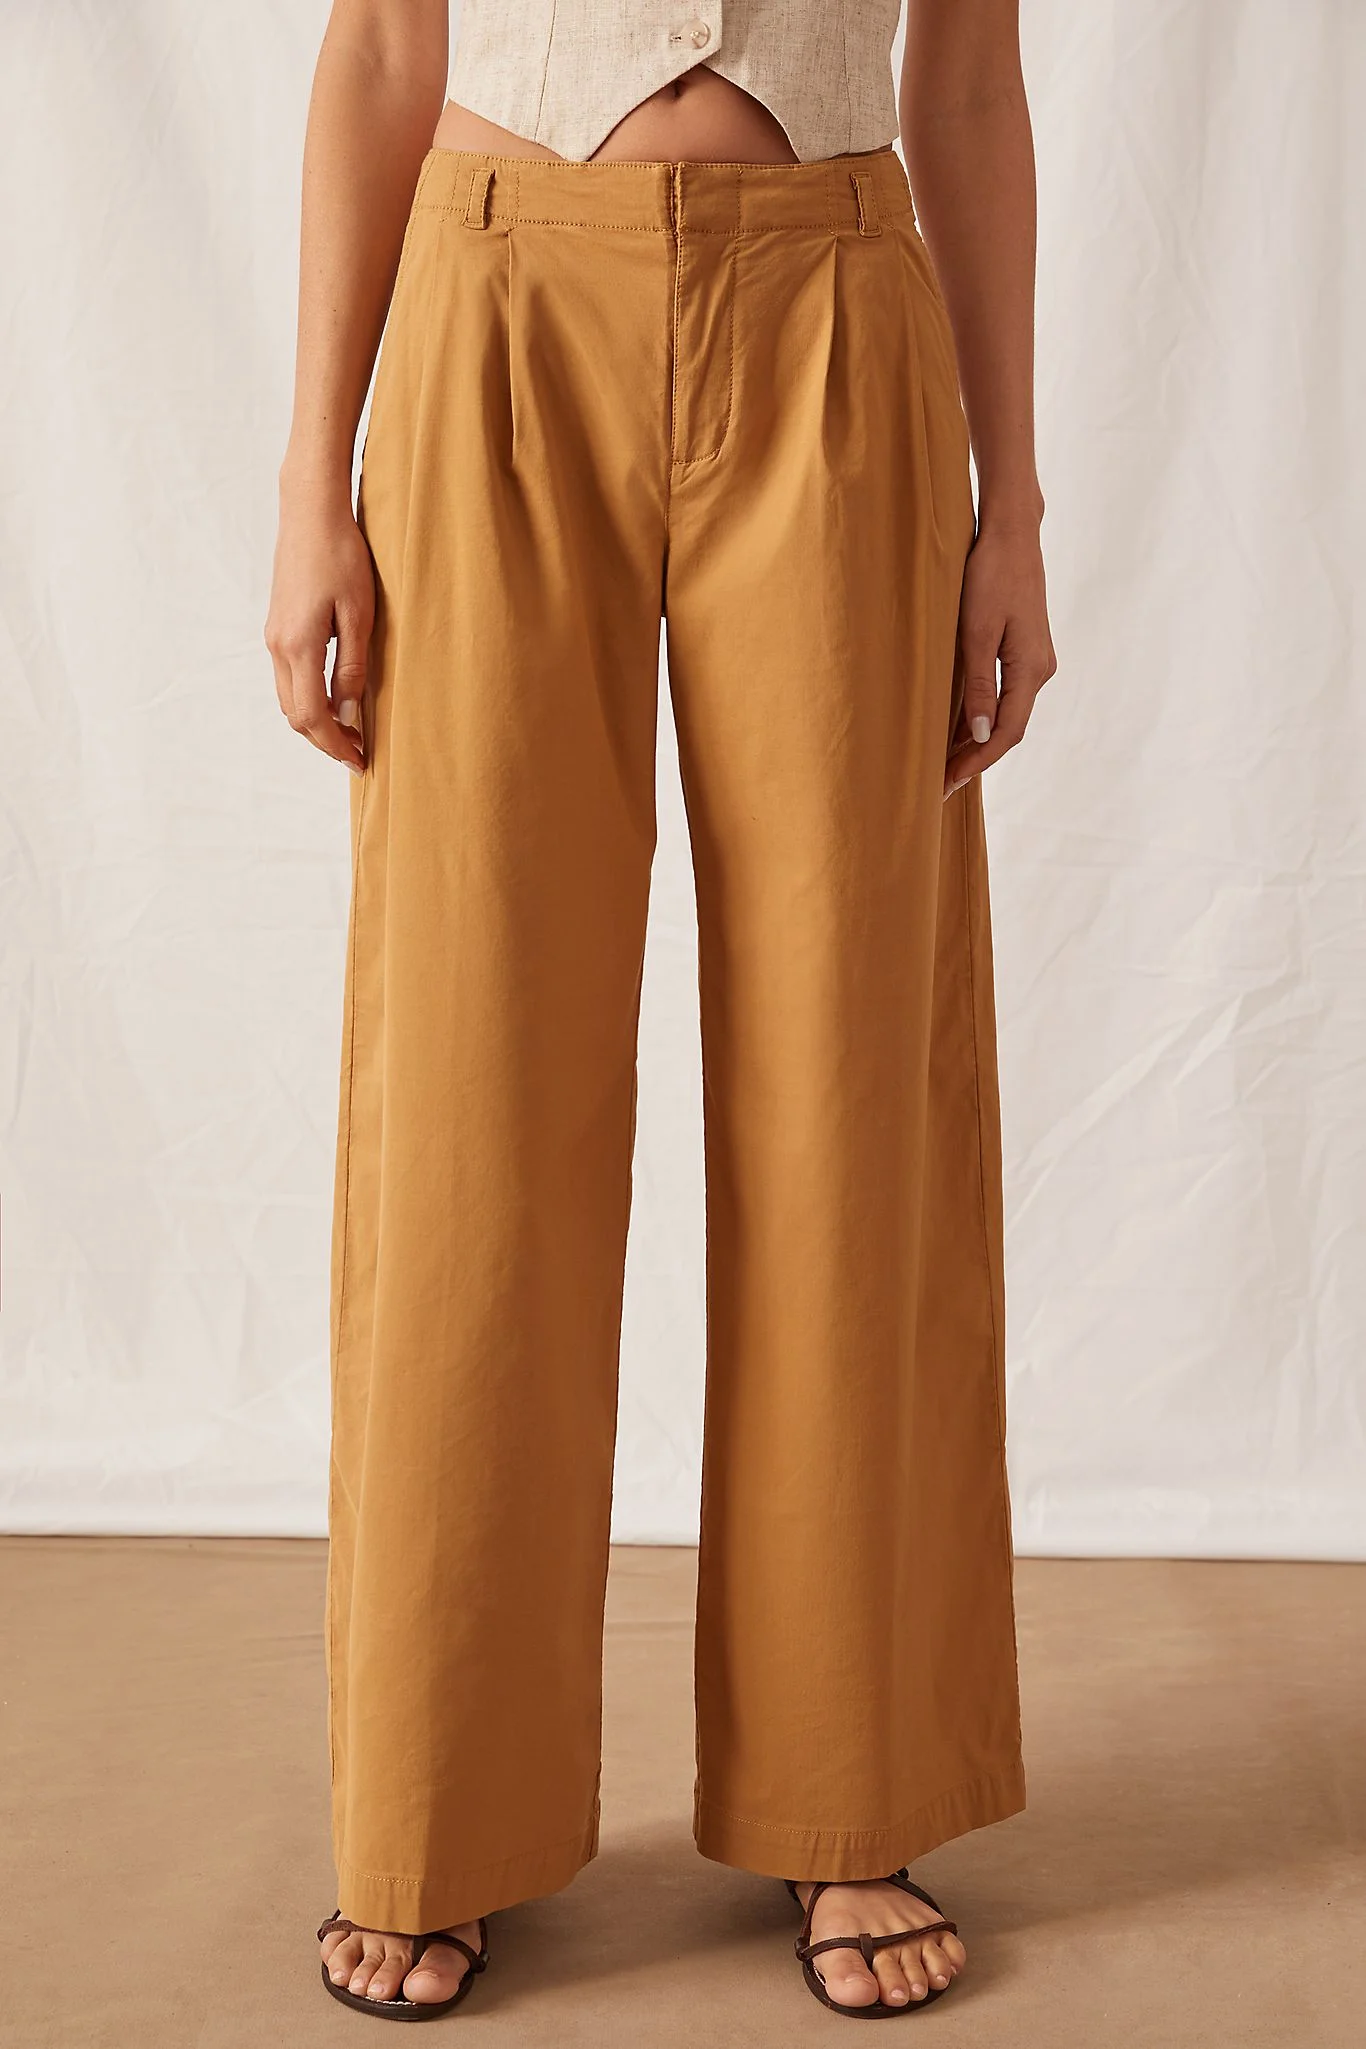 Anthropologie + Low-Rise Wide-Leg Trousers